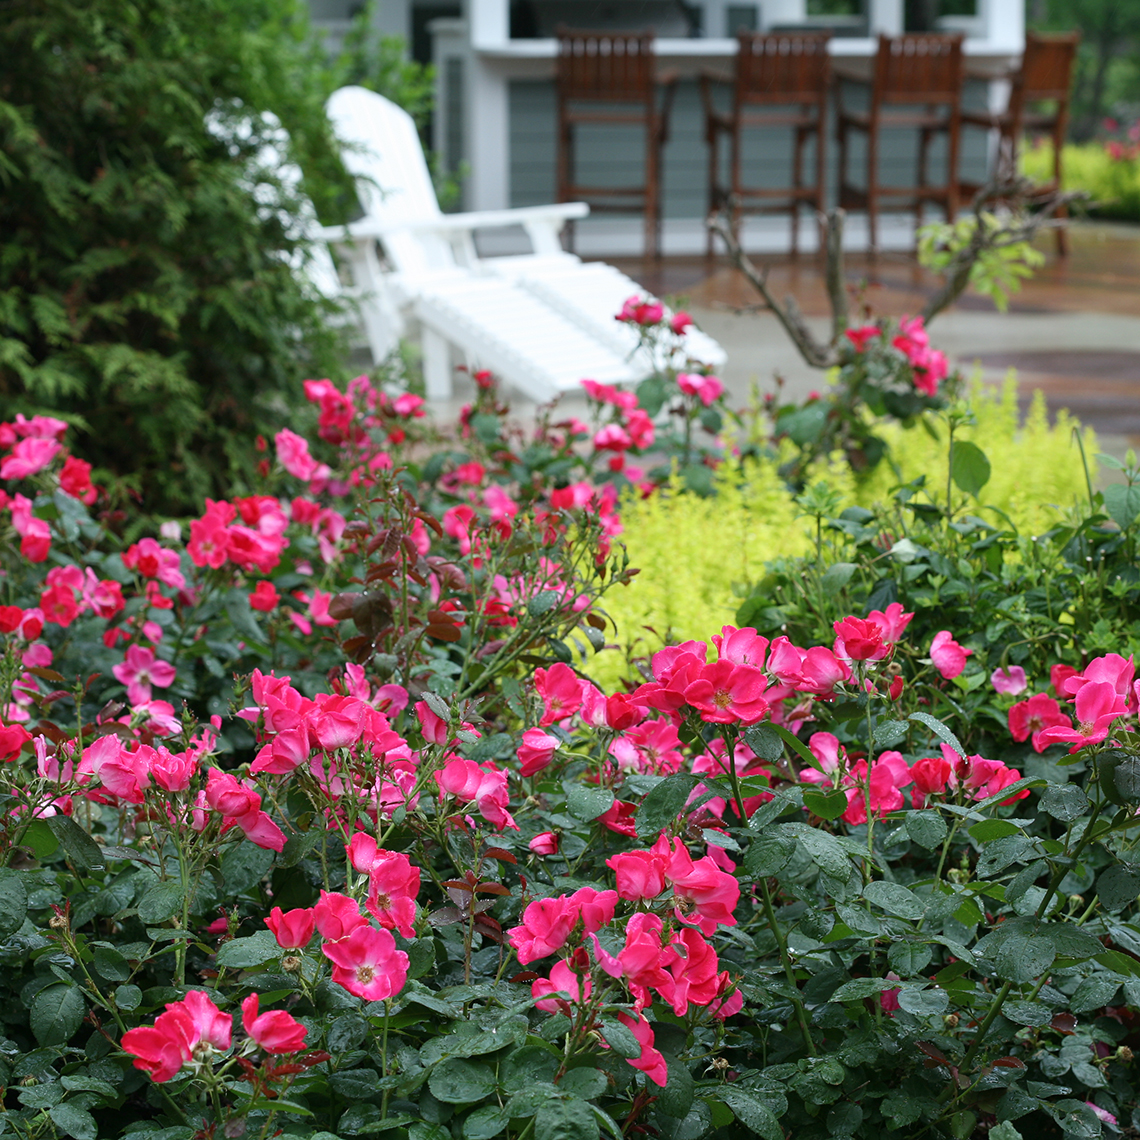 Mass planting of Pink Home Run Rosa lining patio with white chairs and wooden stools